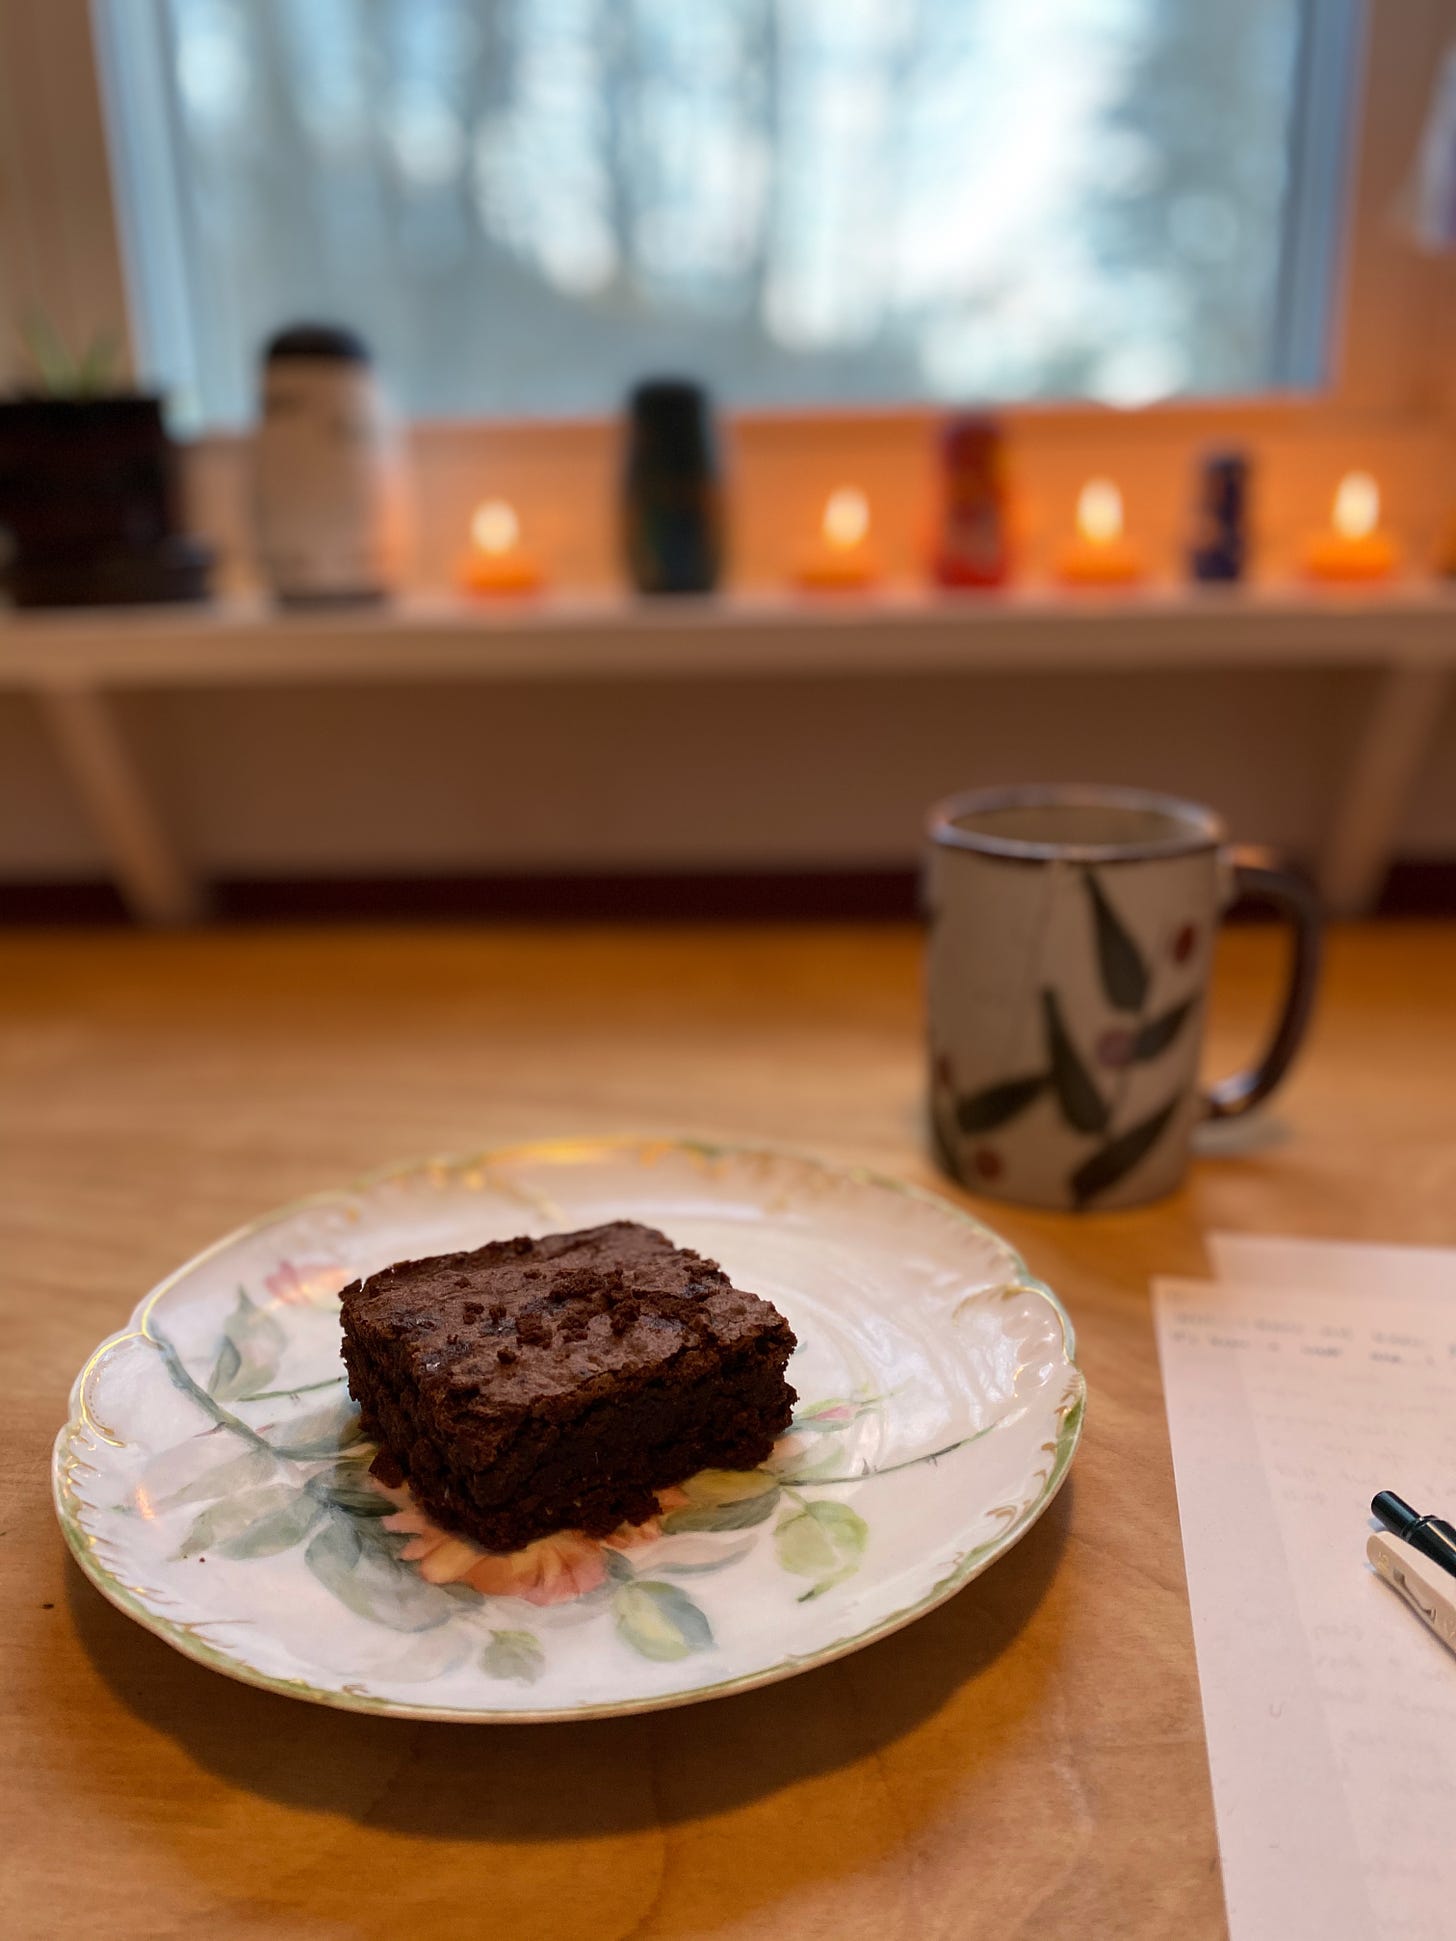 A brownie sits on a painted china plate on a wooden desk. There is a mug of tea behind the plate, and a few papers and a pen rest on the desk. In the background, there is a widow with a view of blurry trees; small lit candles and a series of painted wooden nesting dolls sit on the windowsill.